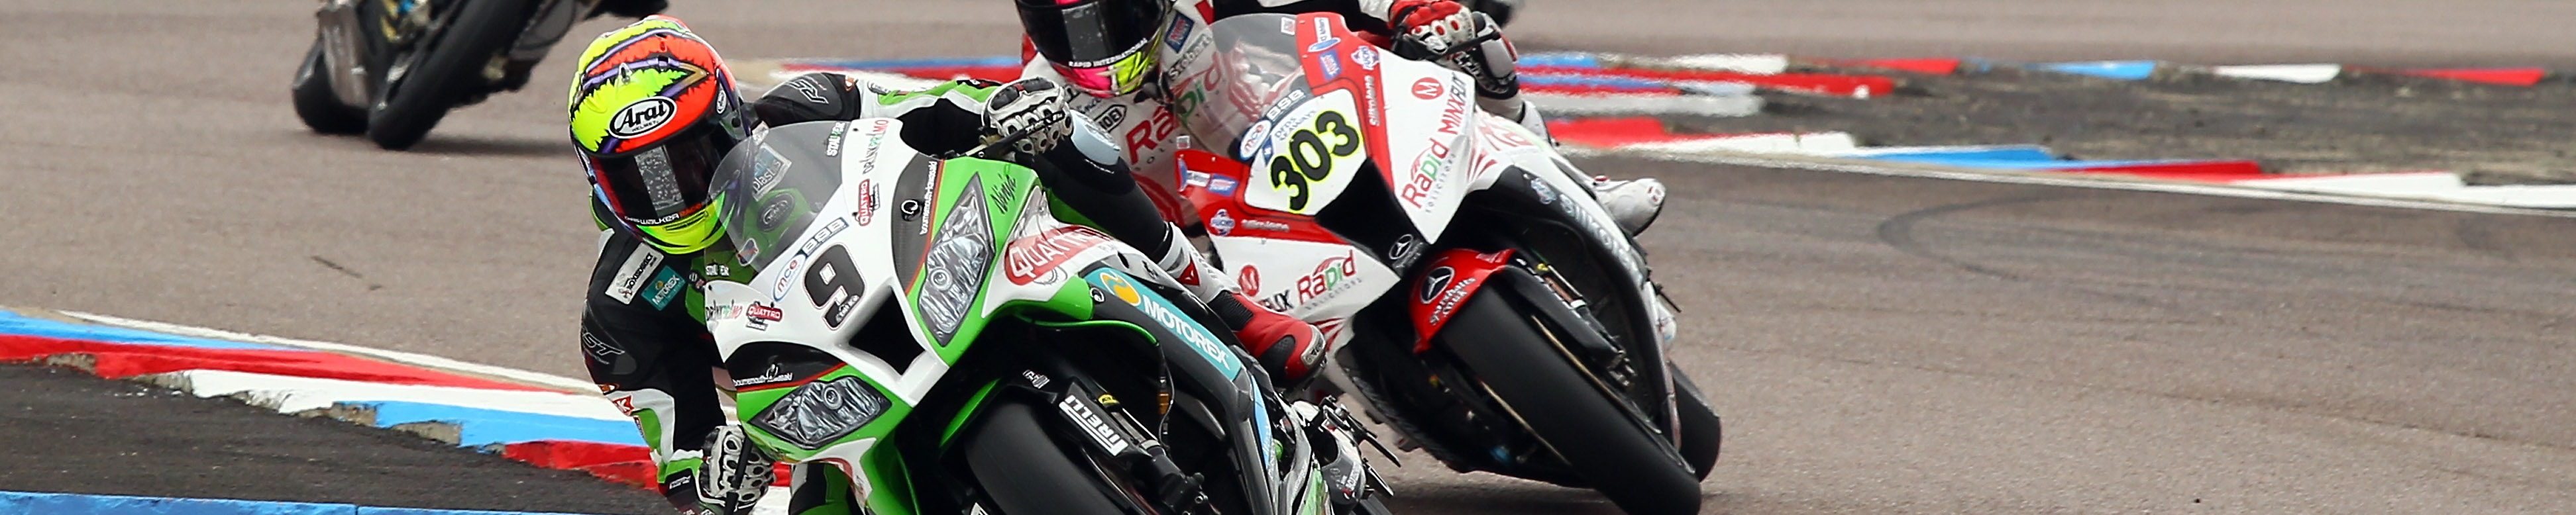 Highs and Lows for Milwaukee Yamaha at Oulton Park